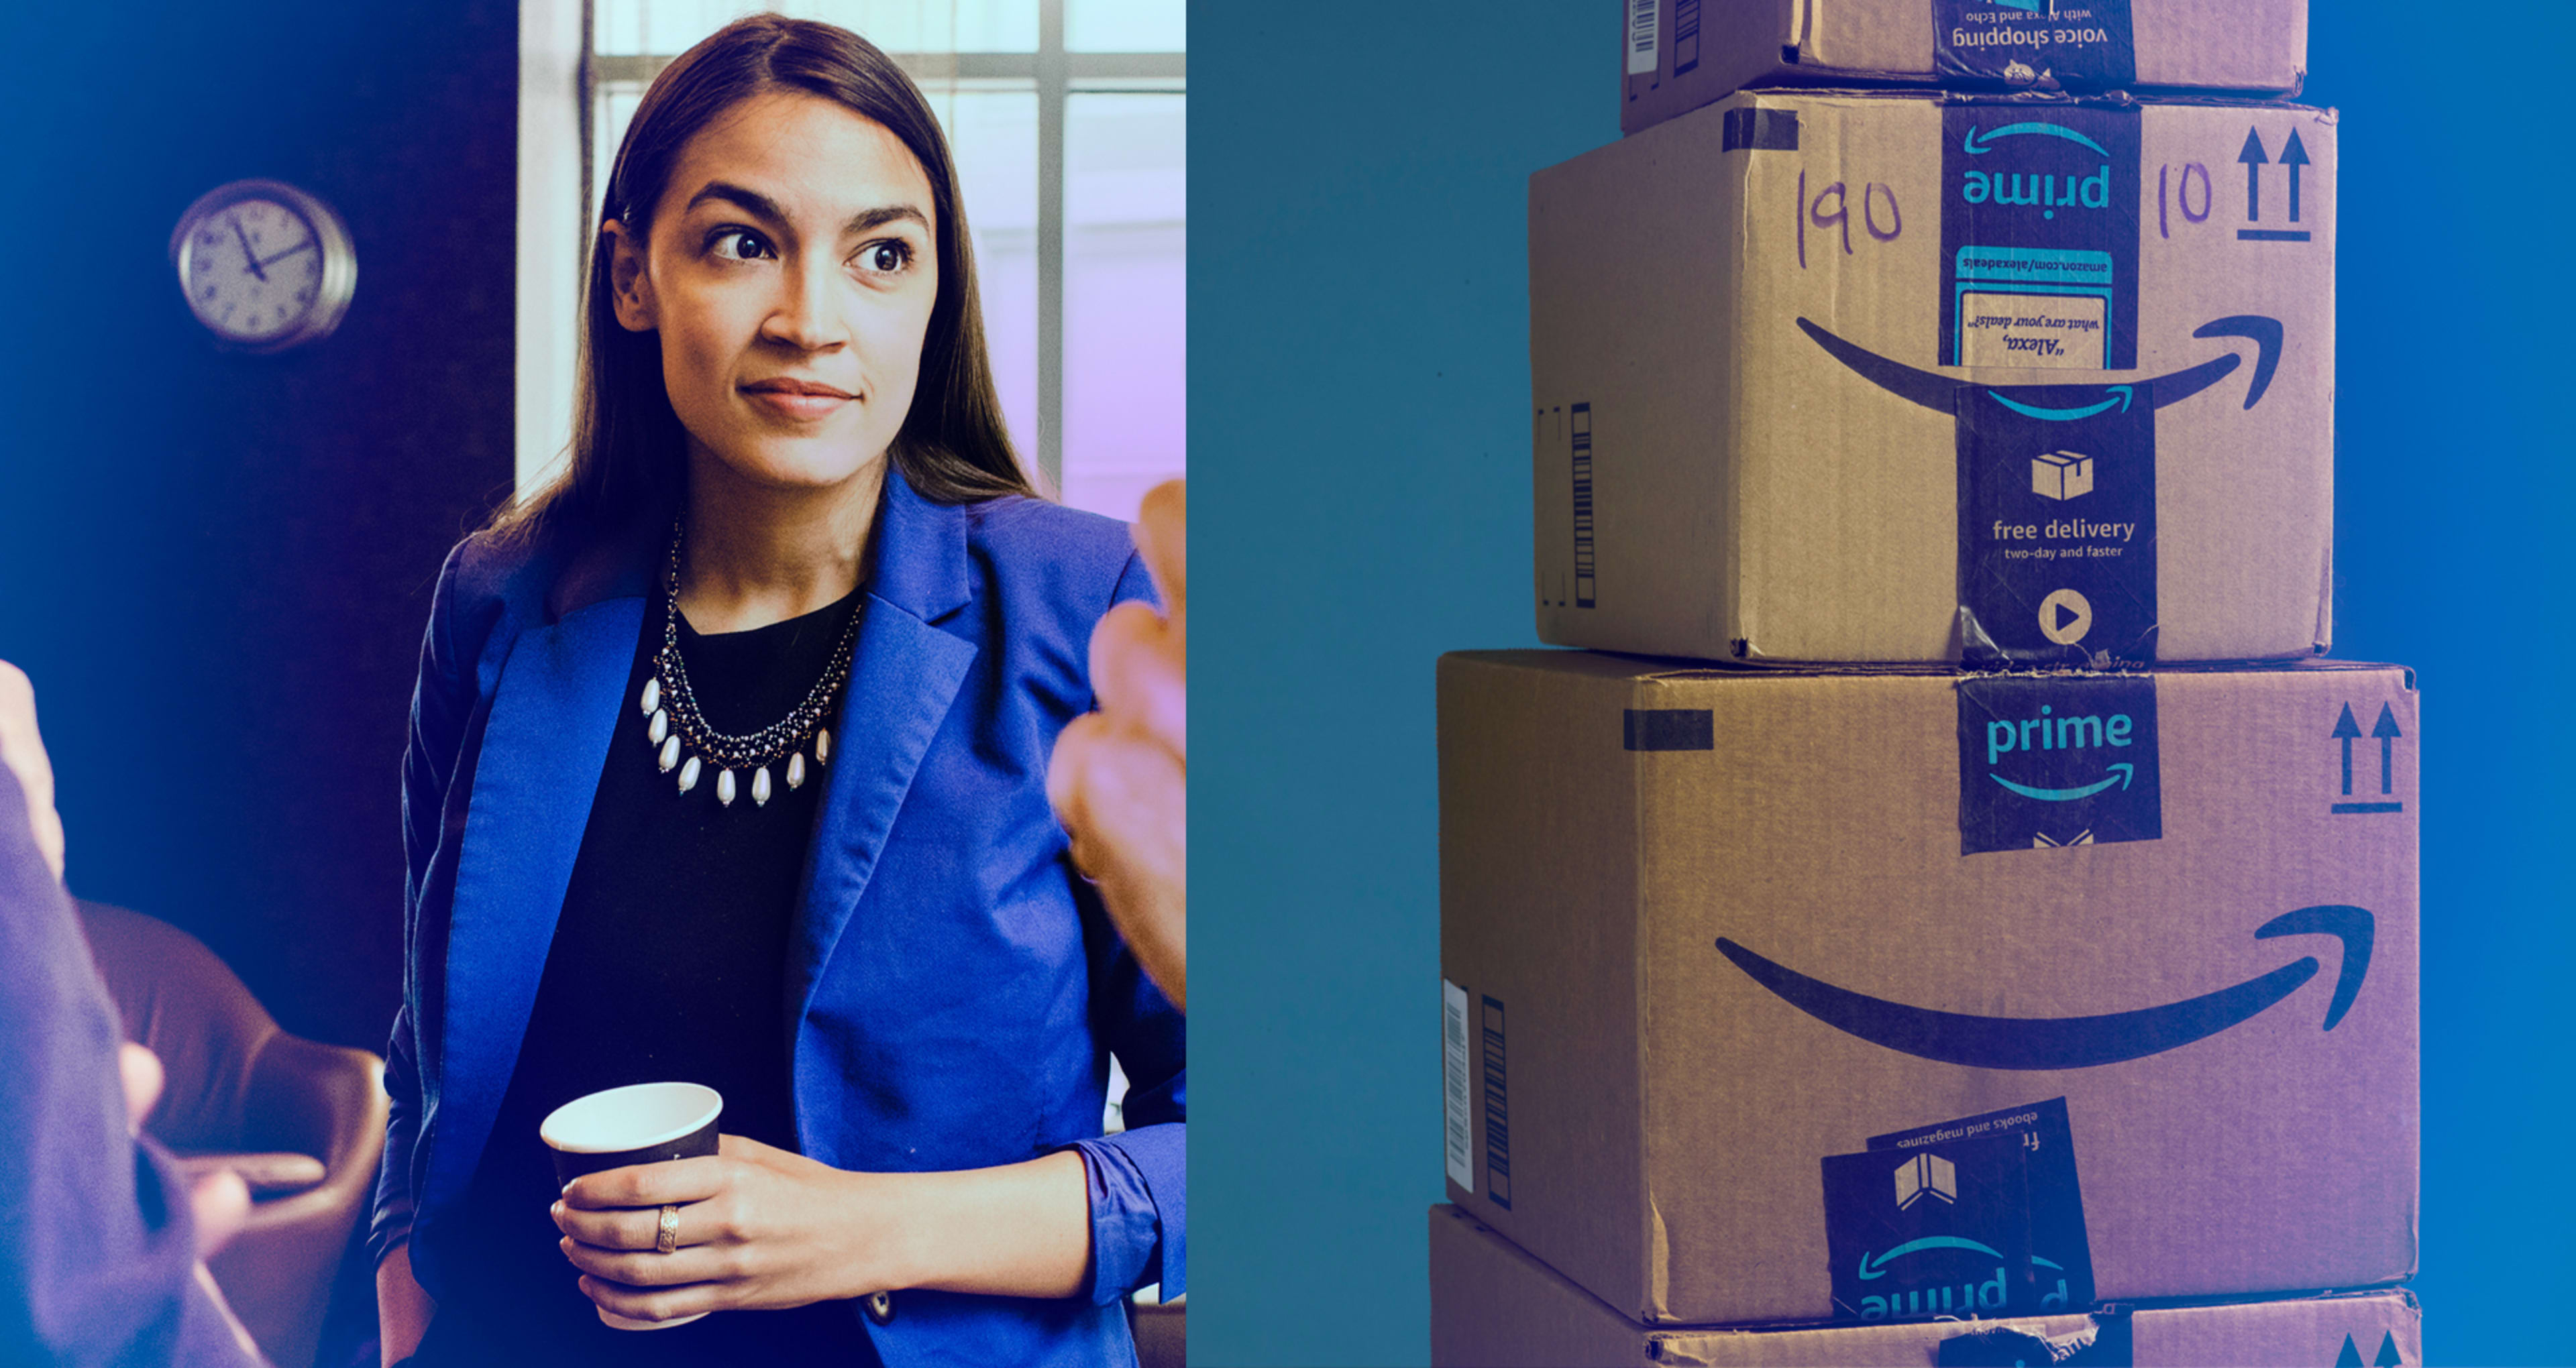 Alexandria Ocasio-Cortez is not thrilled about Amazon coming to Queens